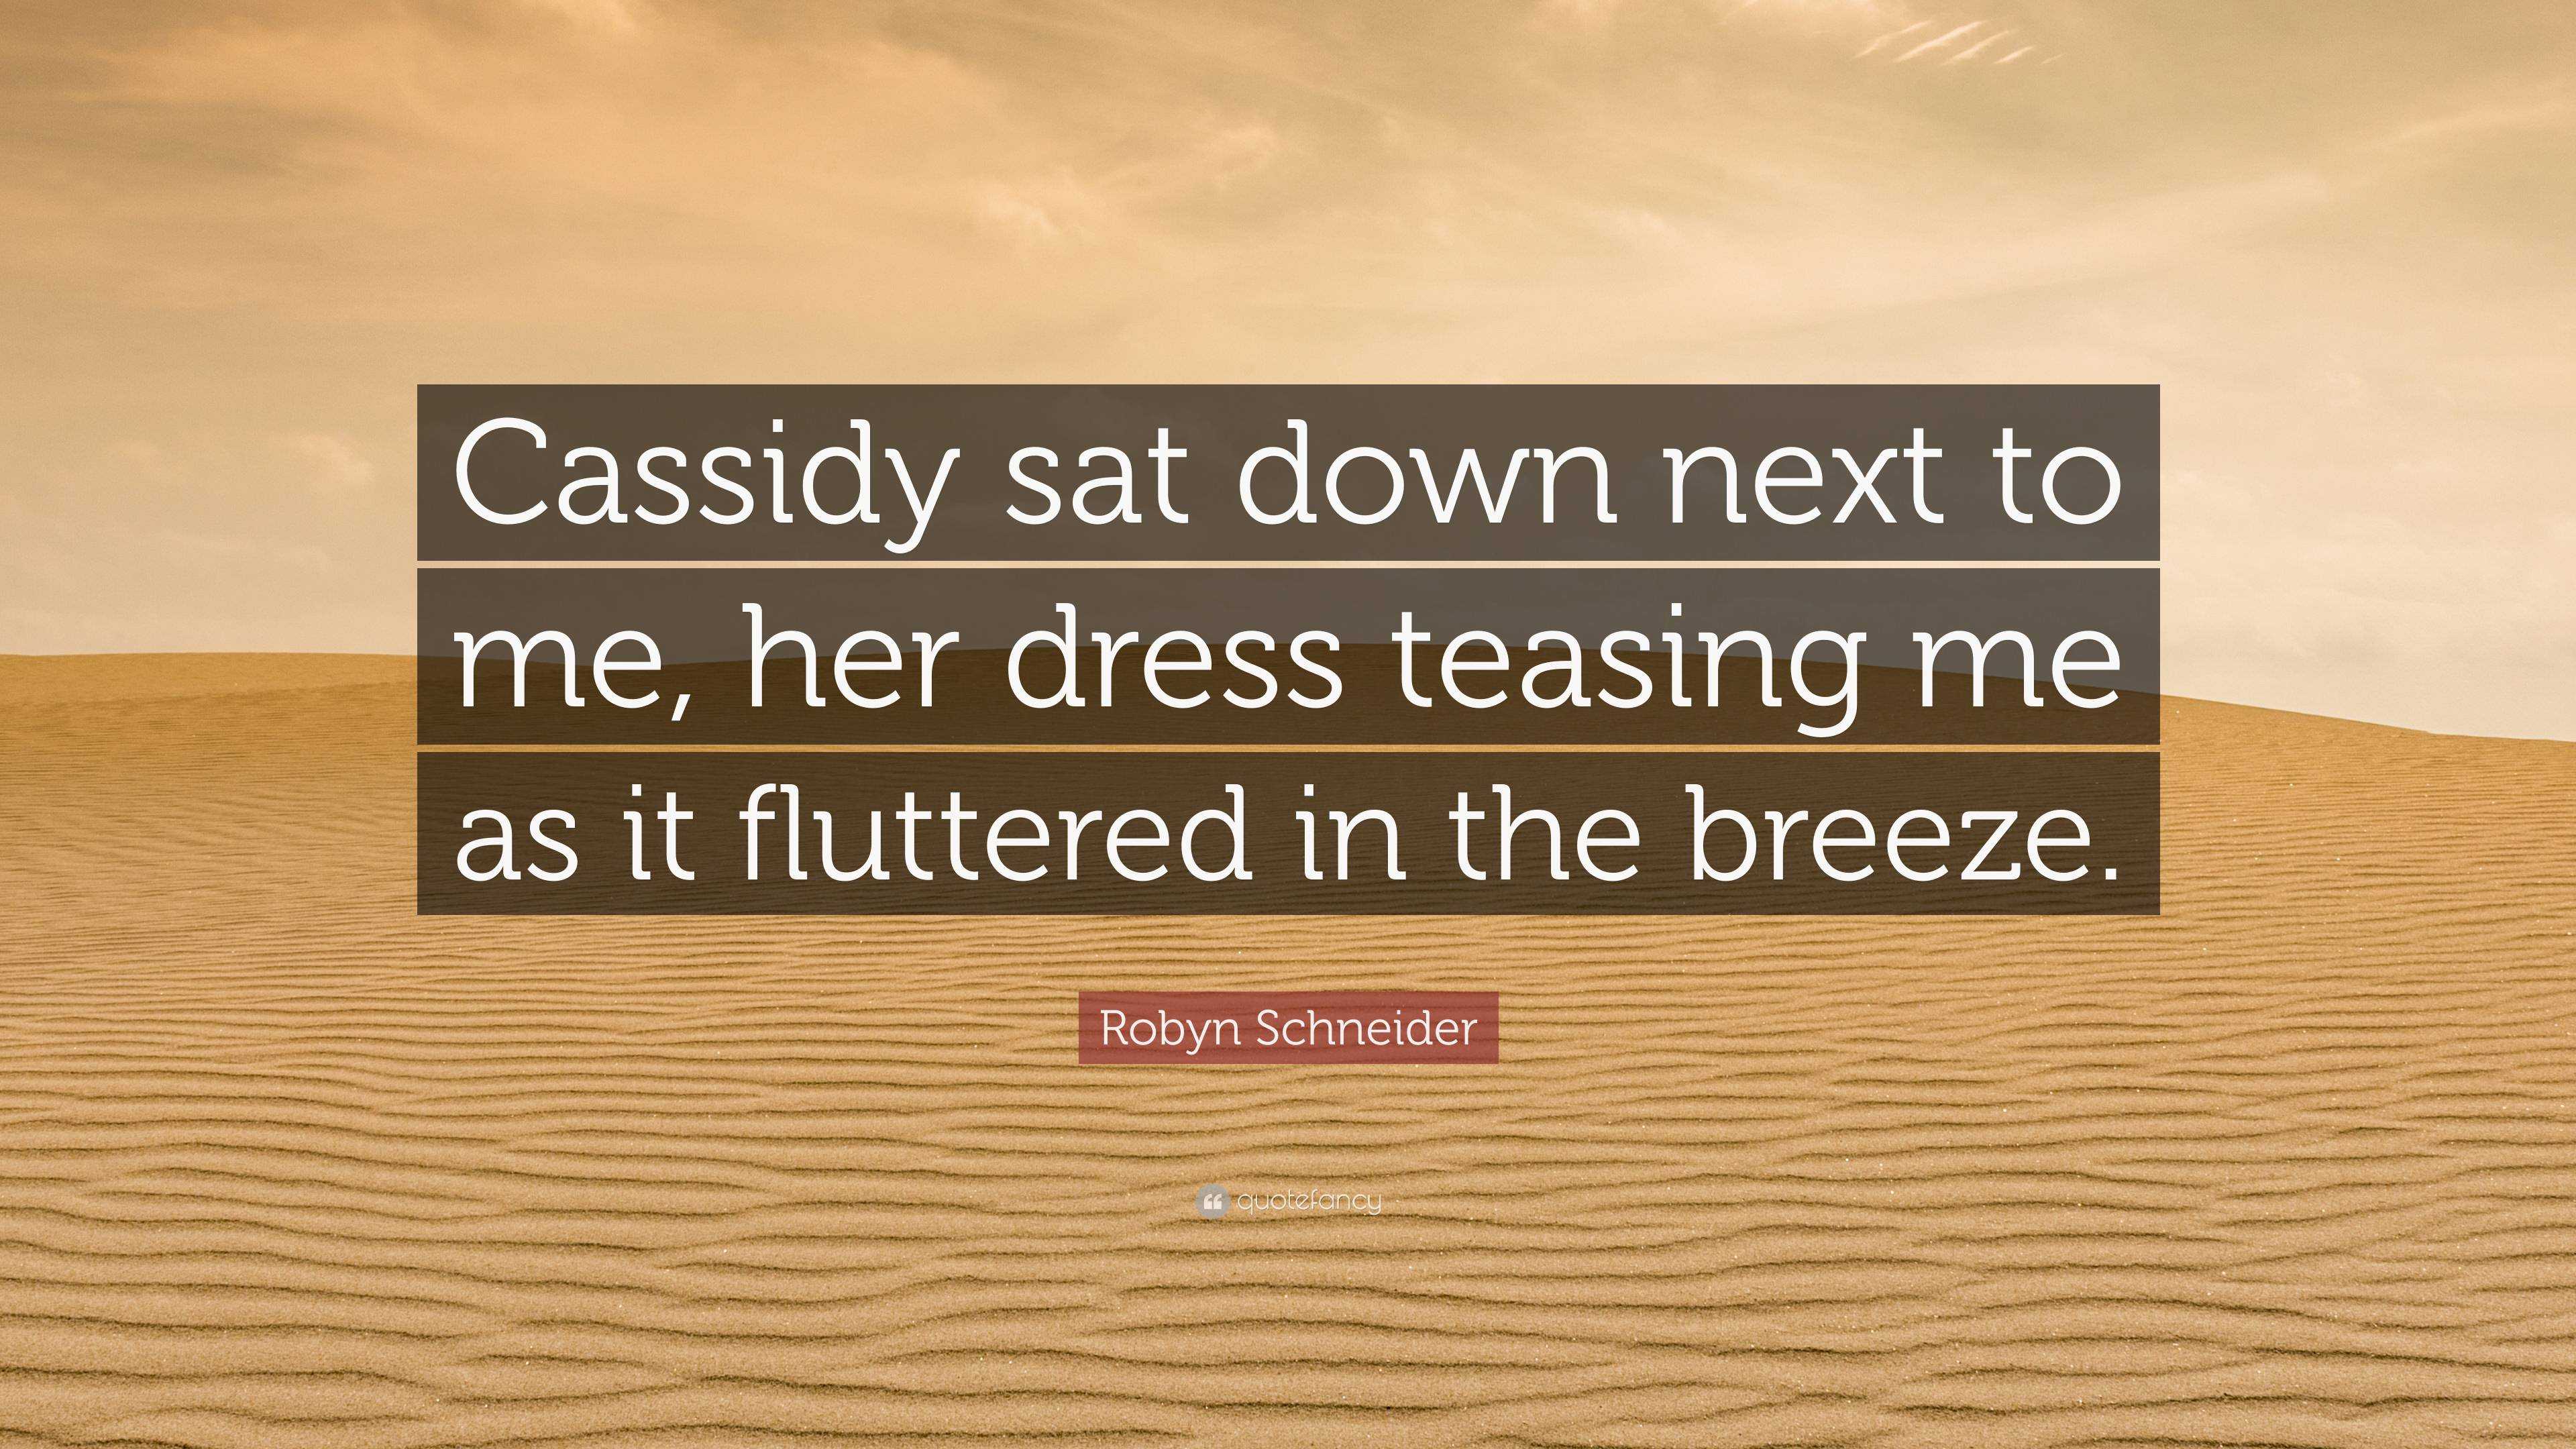 Robyn Schneider Quote Cassidy Sat Down Next To Me Her Dress Teasing Me As It Fluttered